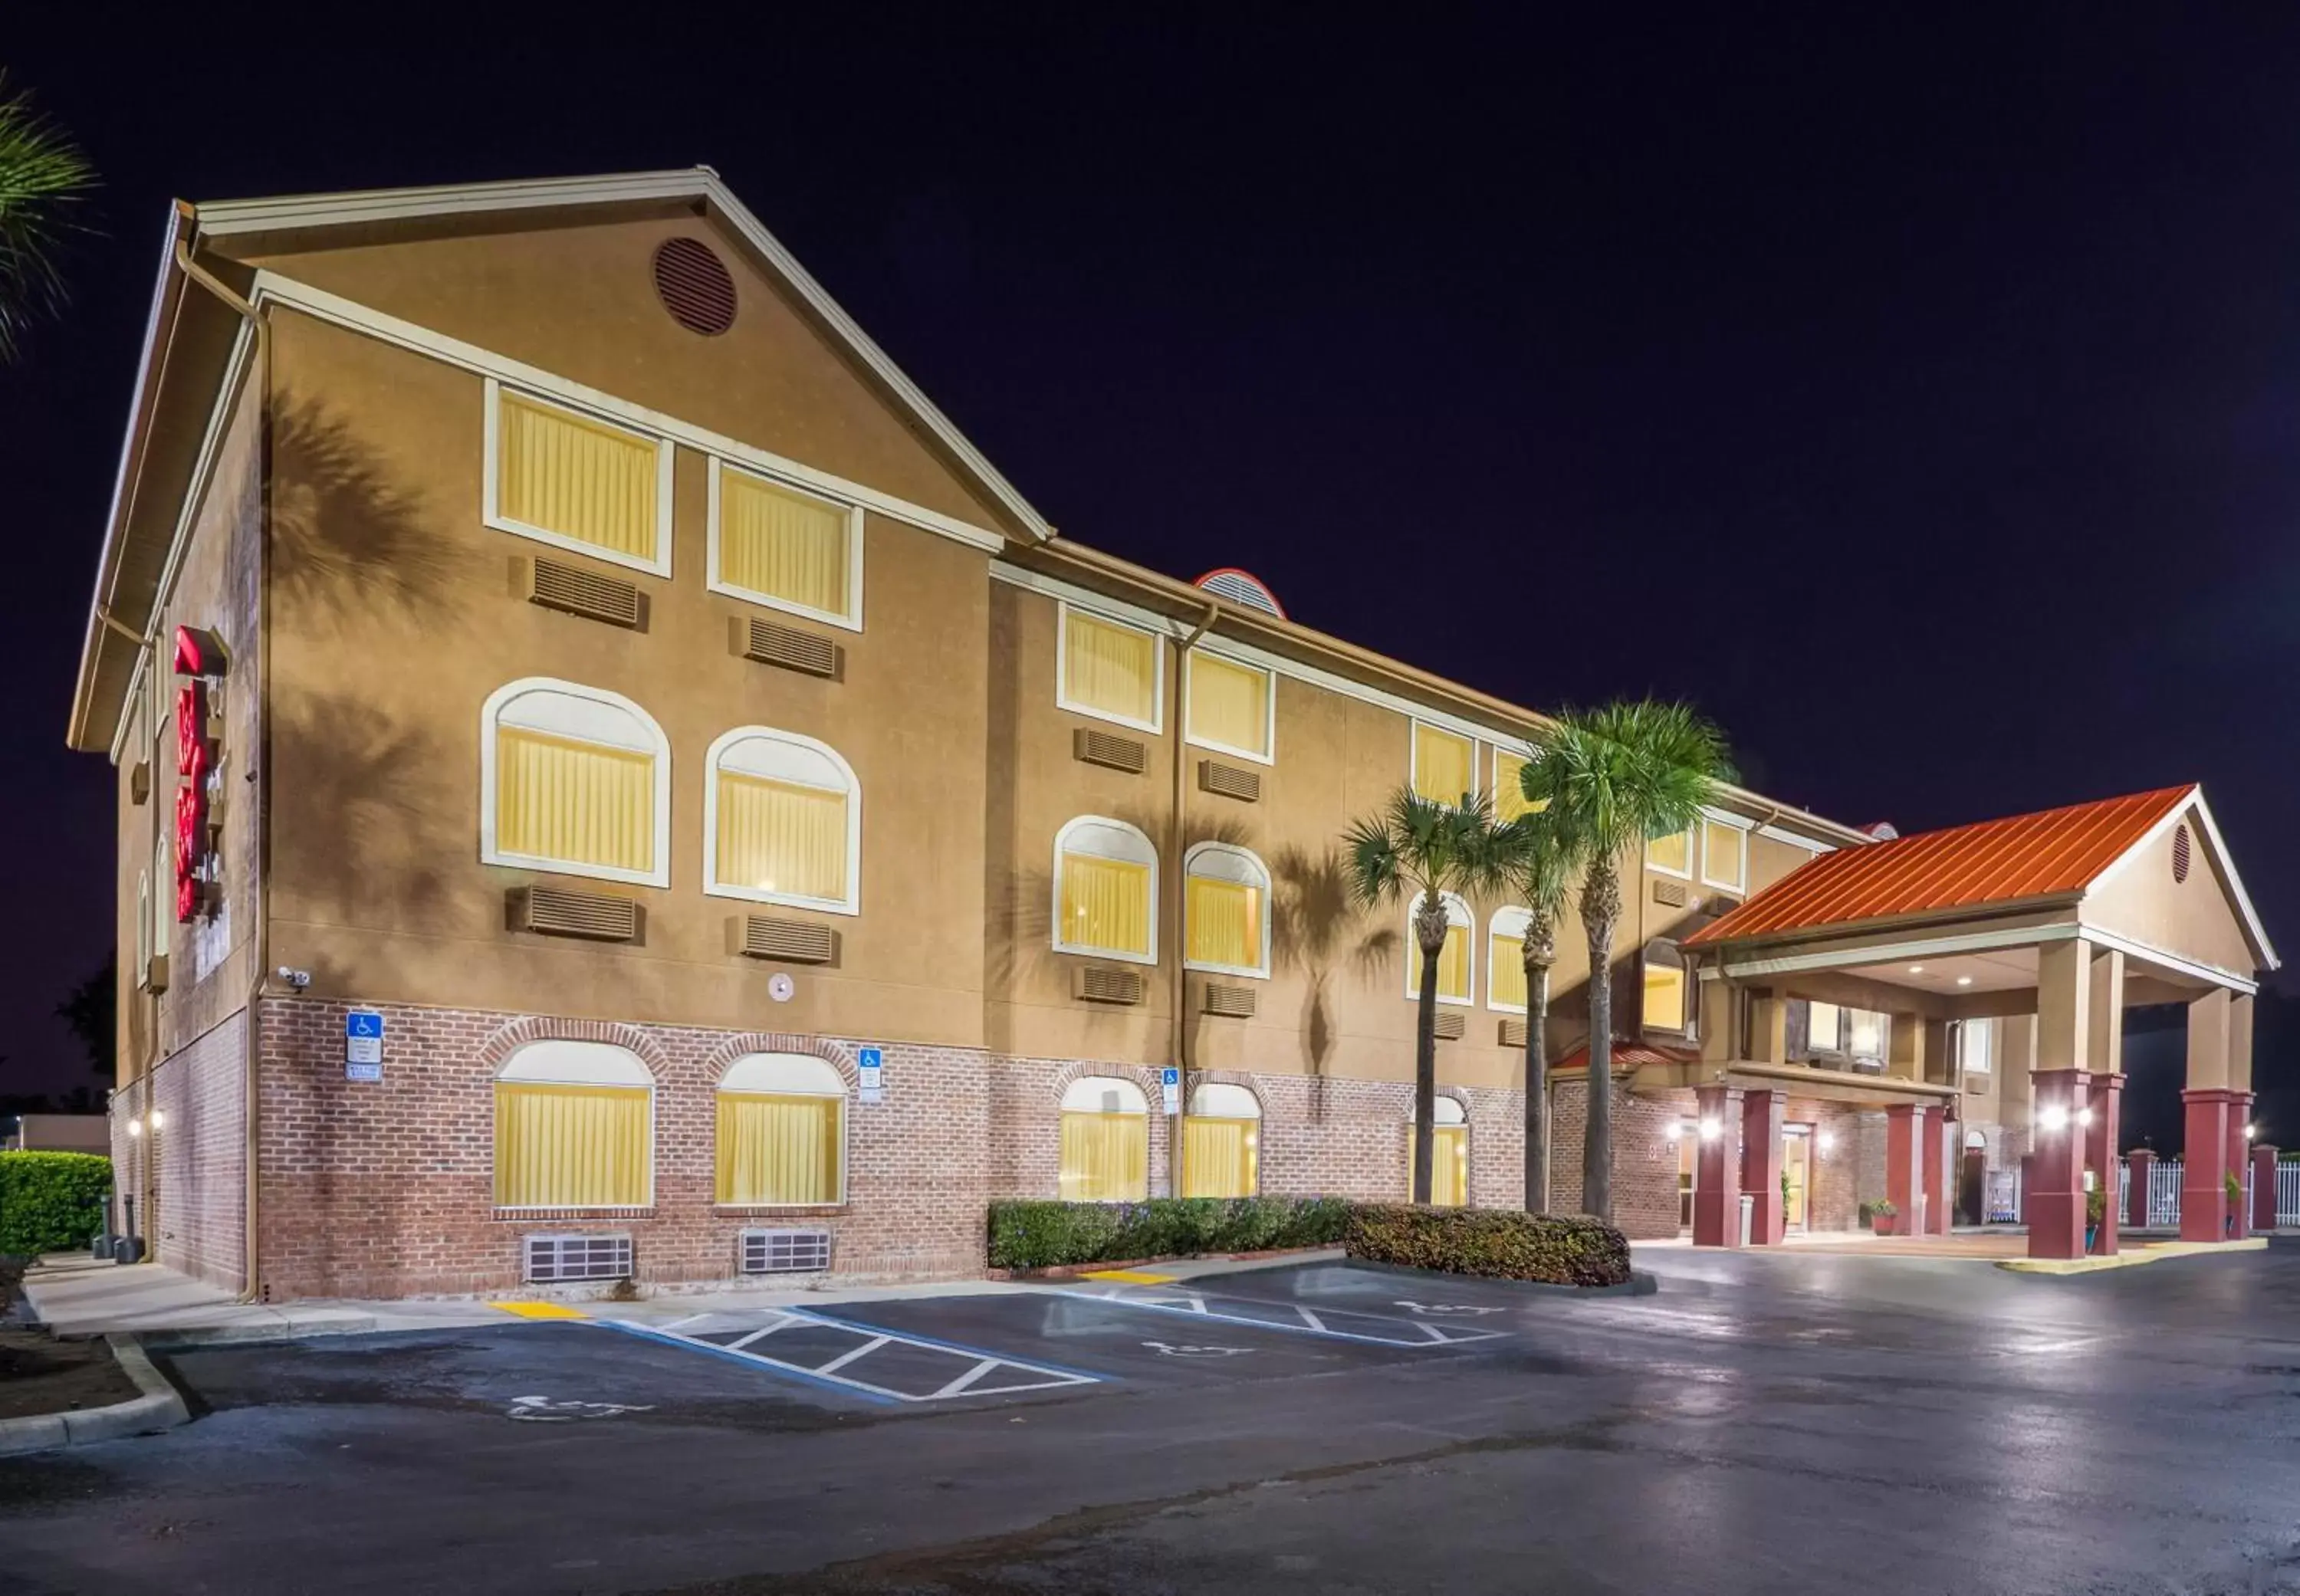 Property Building in Red Roof Inn Ocala